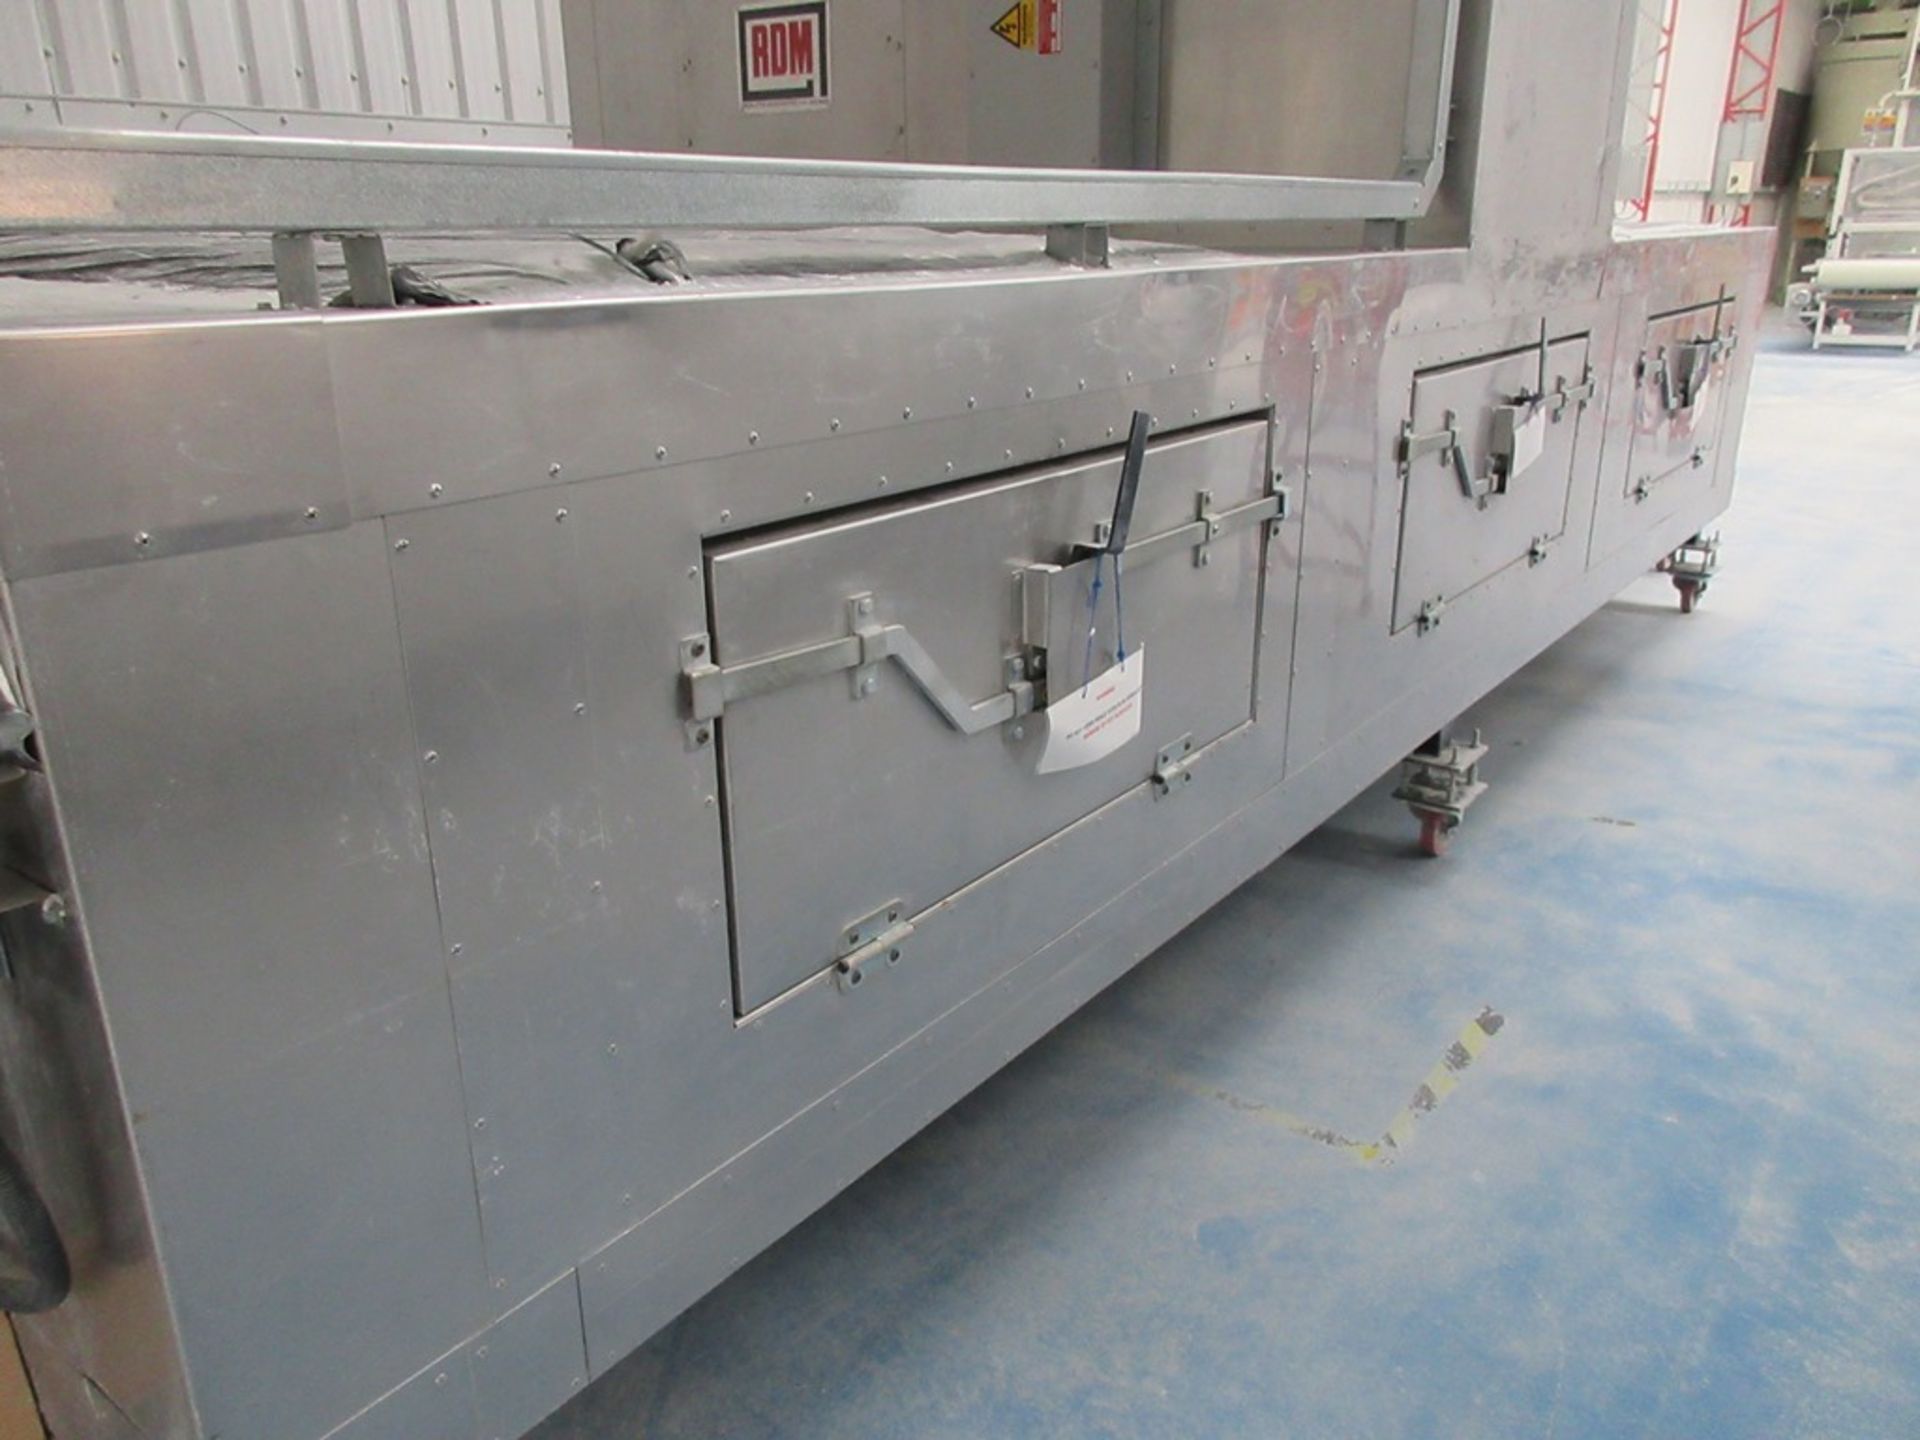 RDM SOP/63286 mobile through feed electric tunnel belt oven, serial no. SOP/63286 (2017) 40KW, - Image 5 of 9